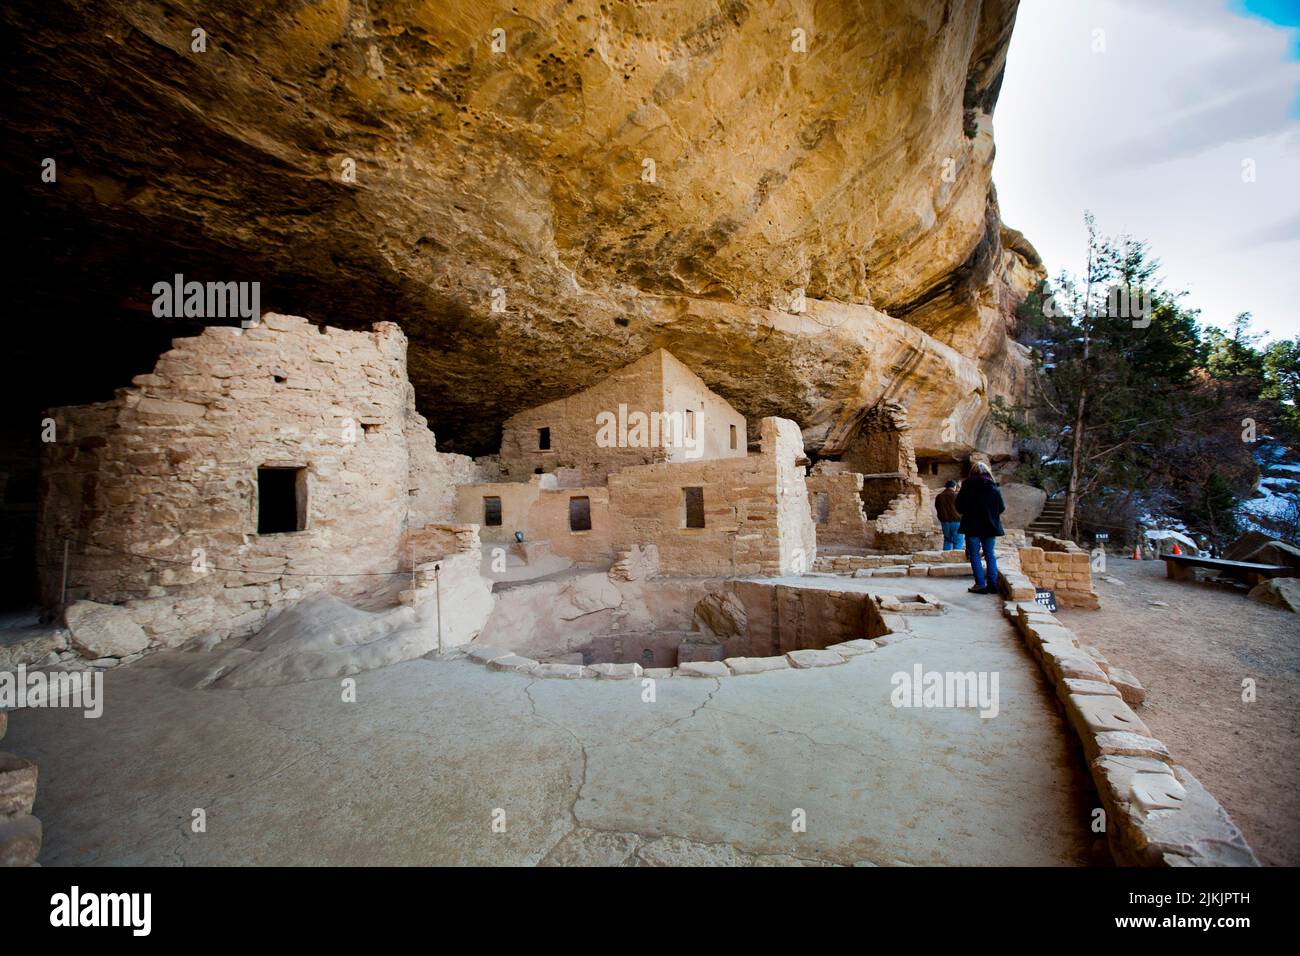 Spruce Tree House ruins and Kiva located in Mesa Verde National Park on the Colorado Plateau, CO. Stock Photo